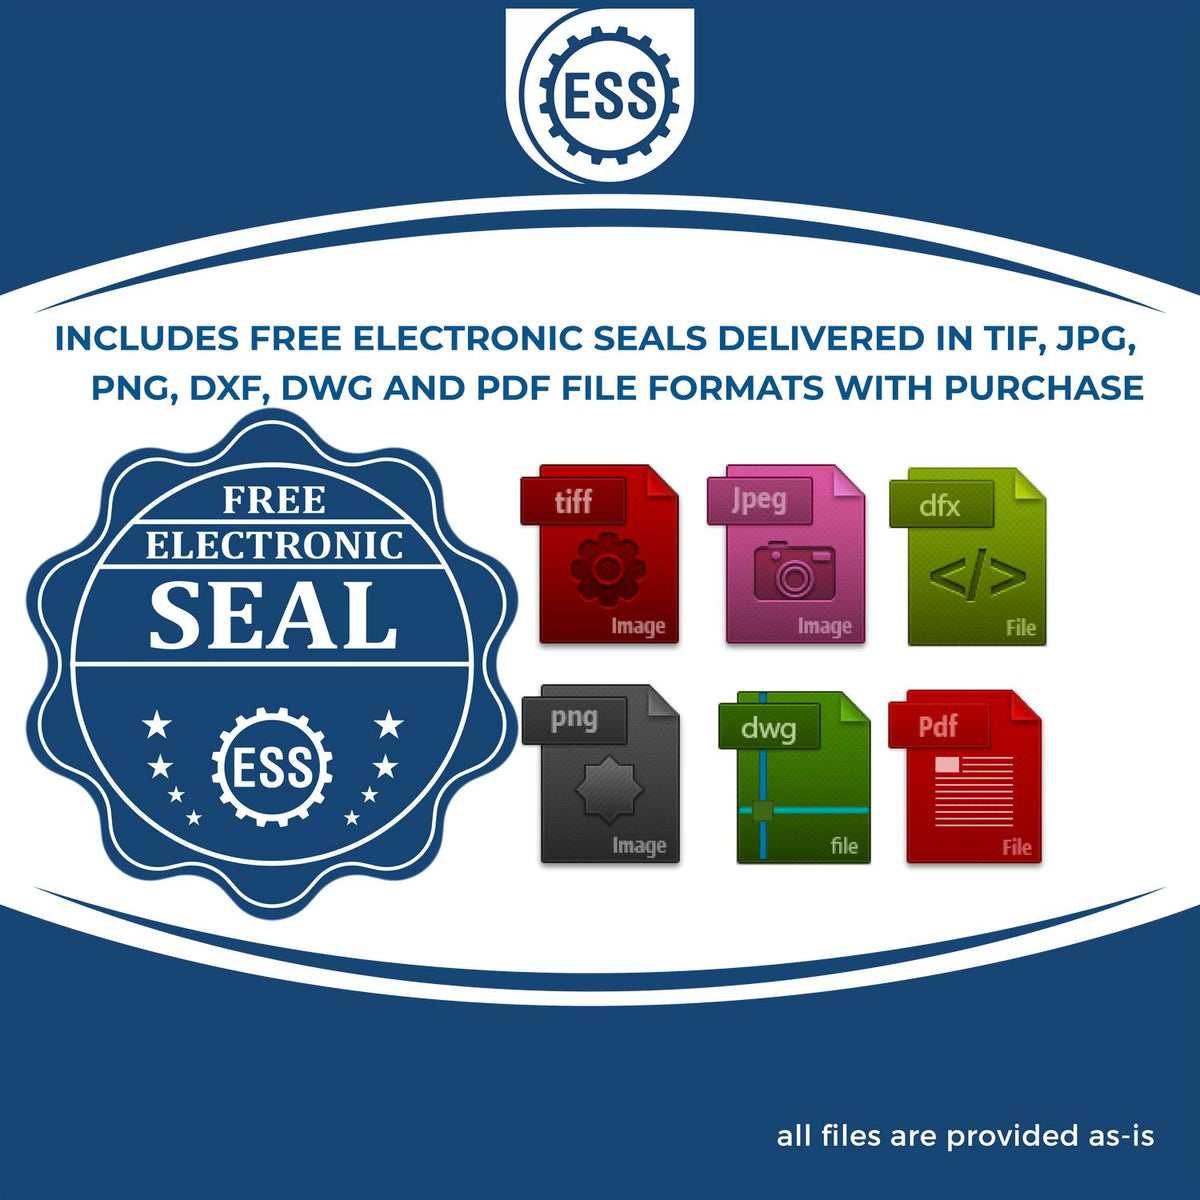 An infographic for the free electronic seal for the Mississippi Geologist Desk Seal illustrating the different file type icons such as DXF, DWG, TIF, JPG and PNG.